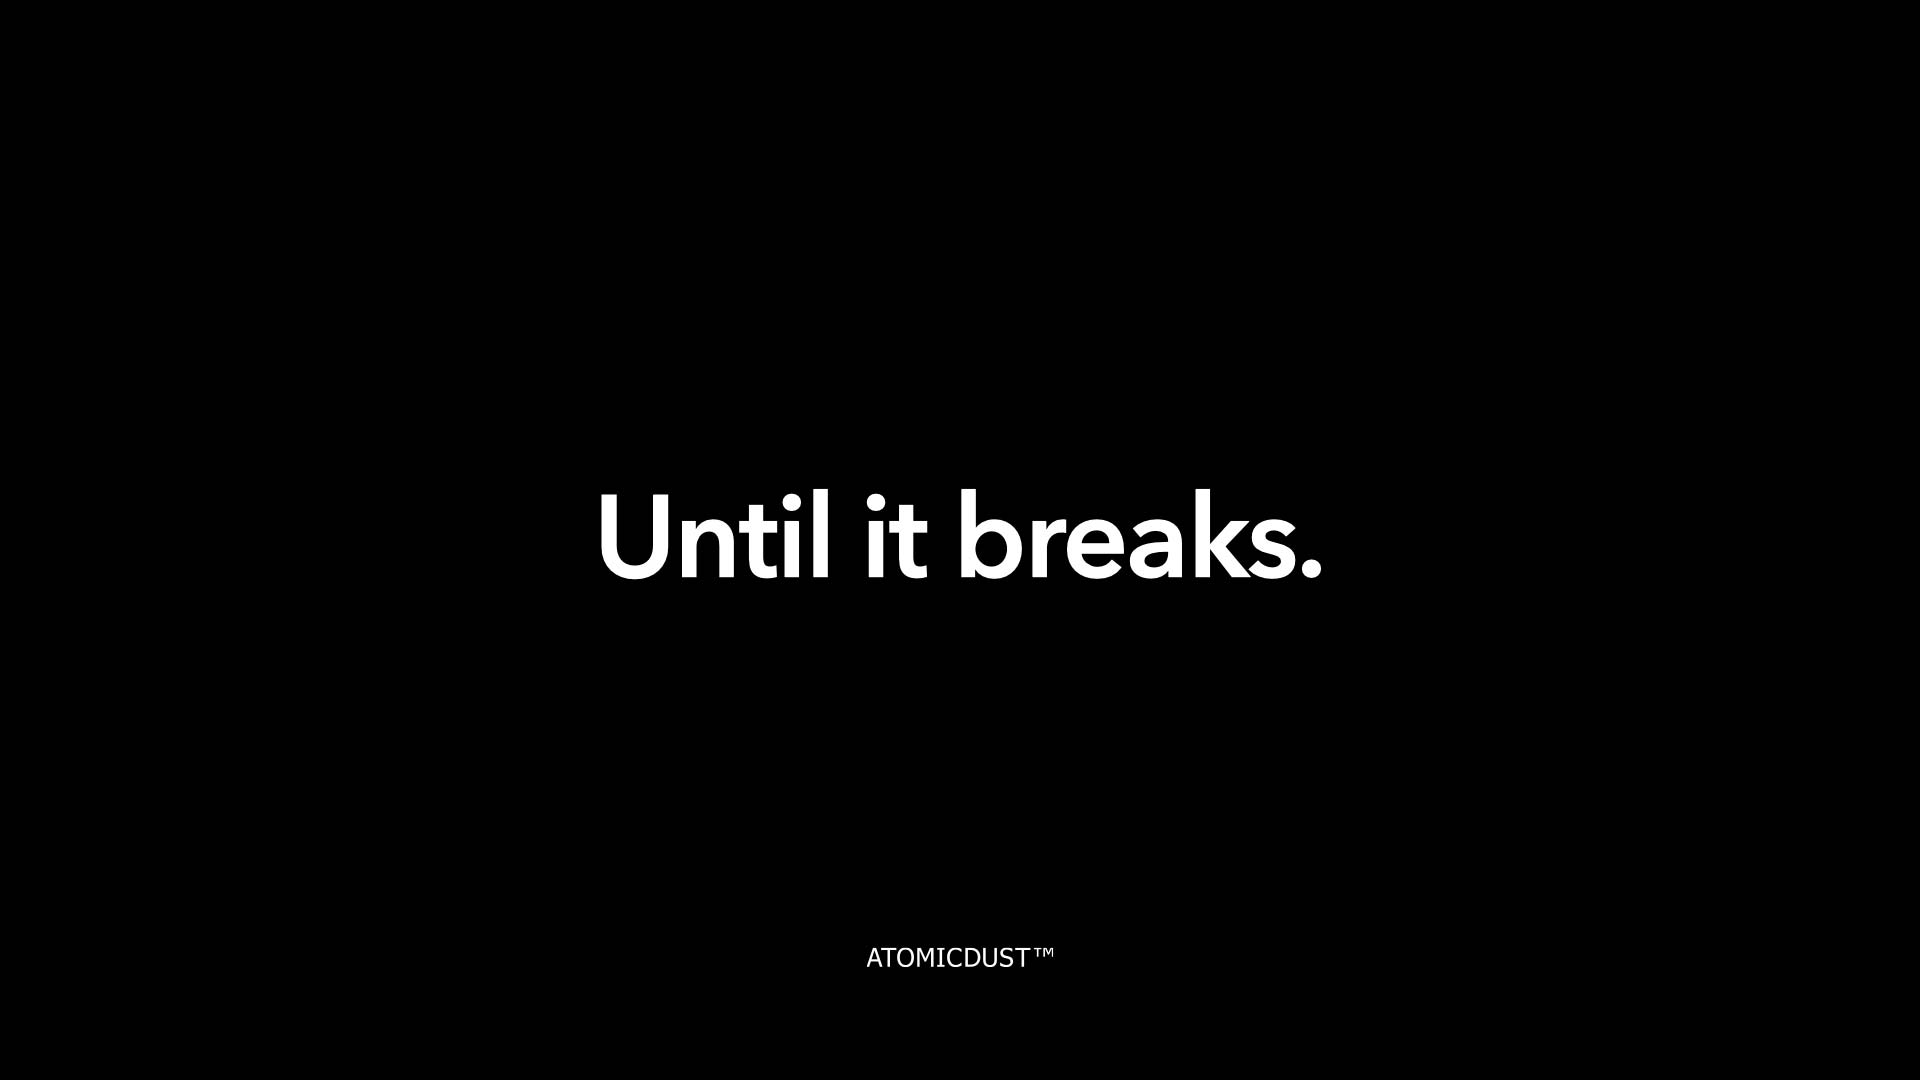 A black rectangle with white type in a B2B presentation that says "Until it breaks."